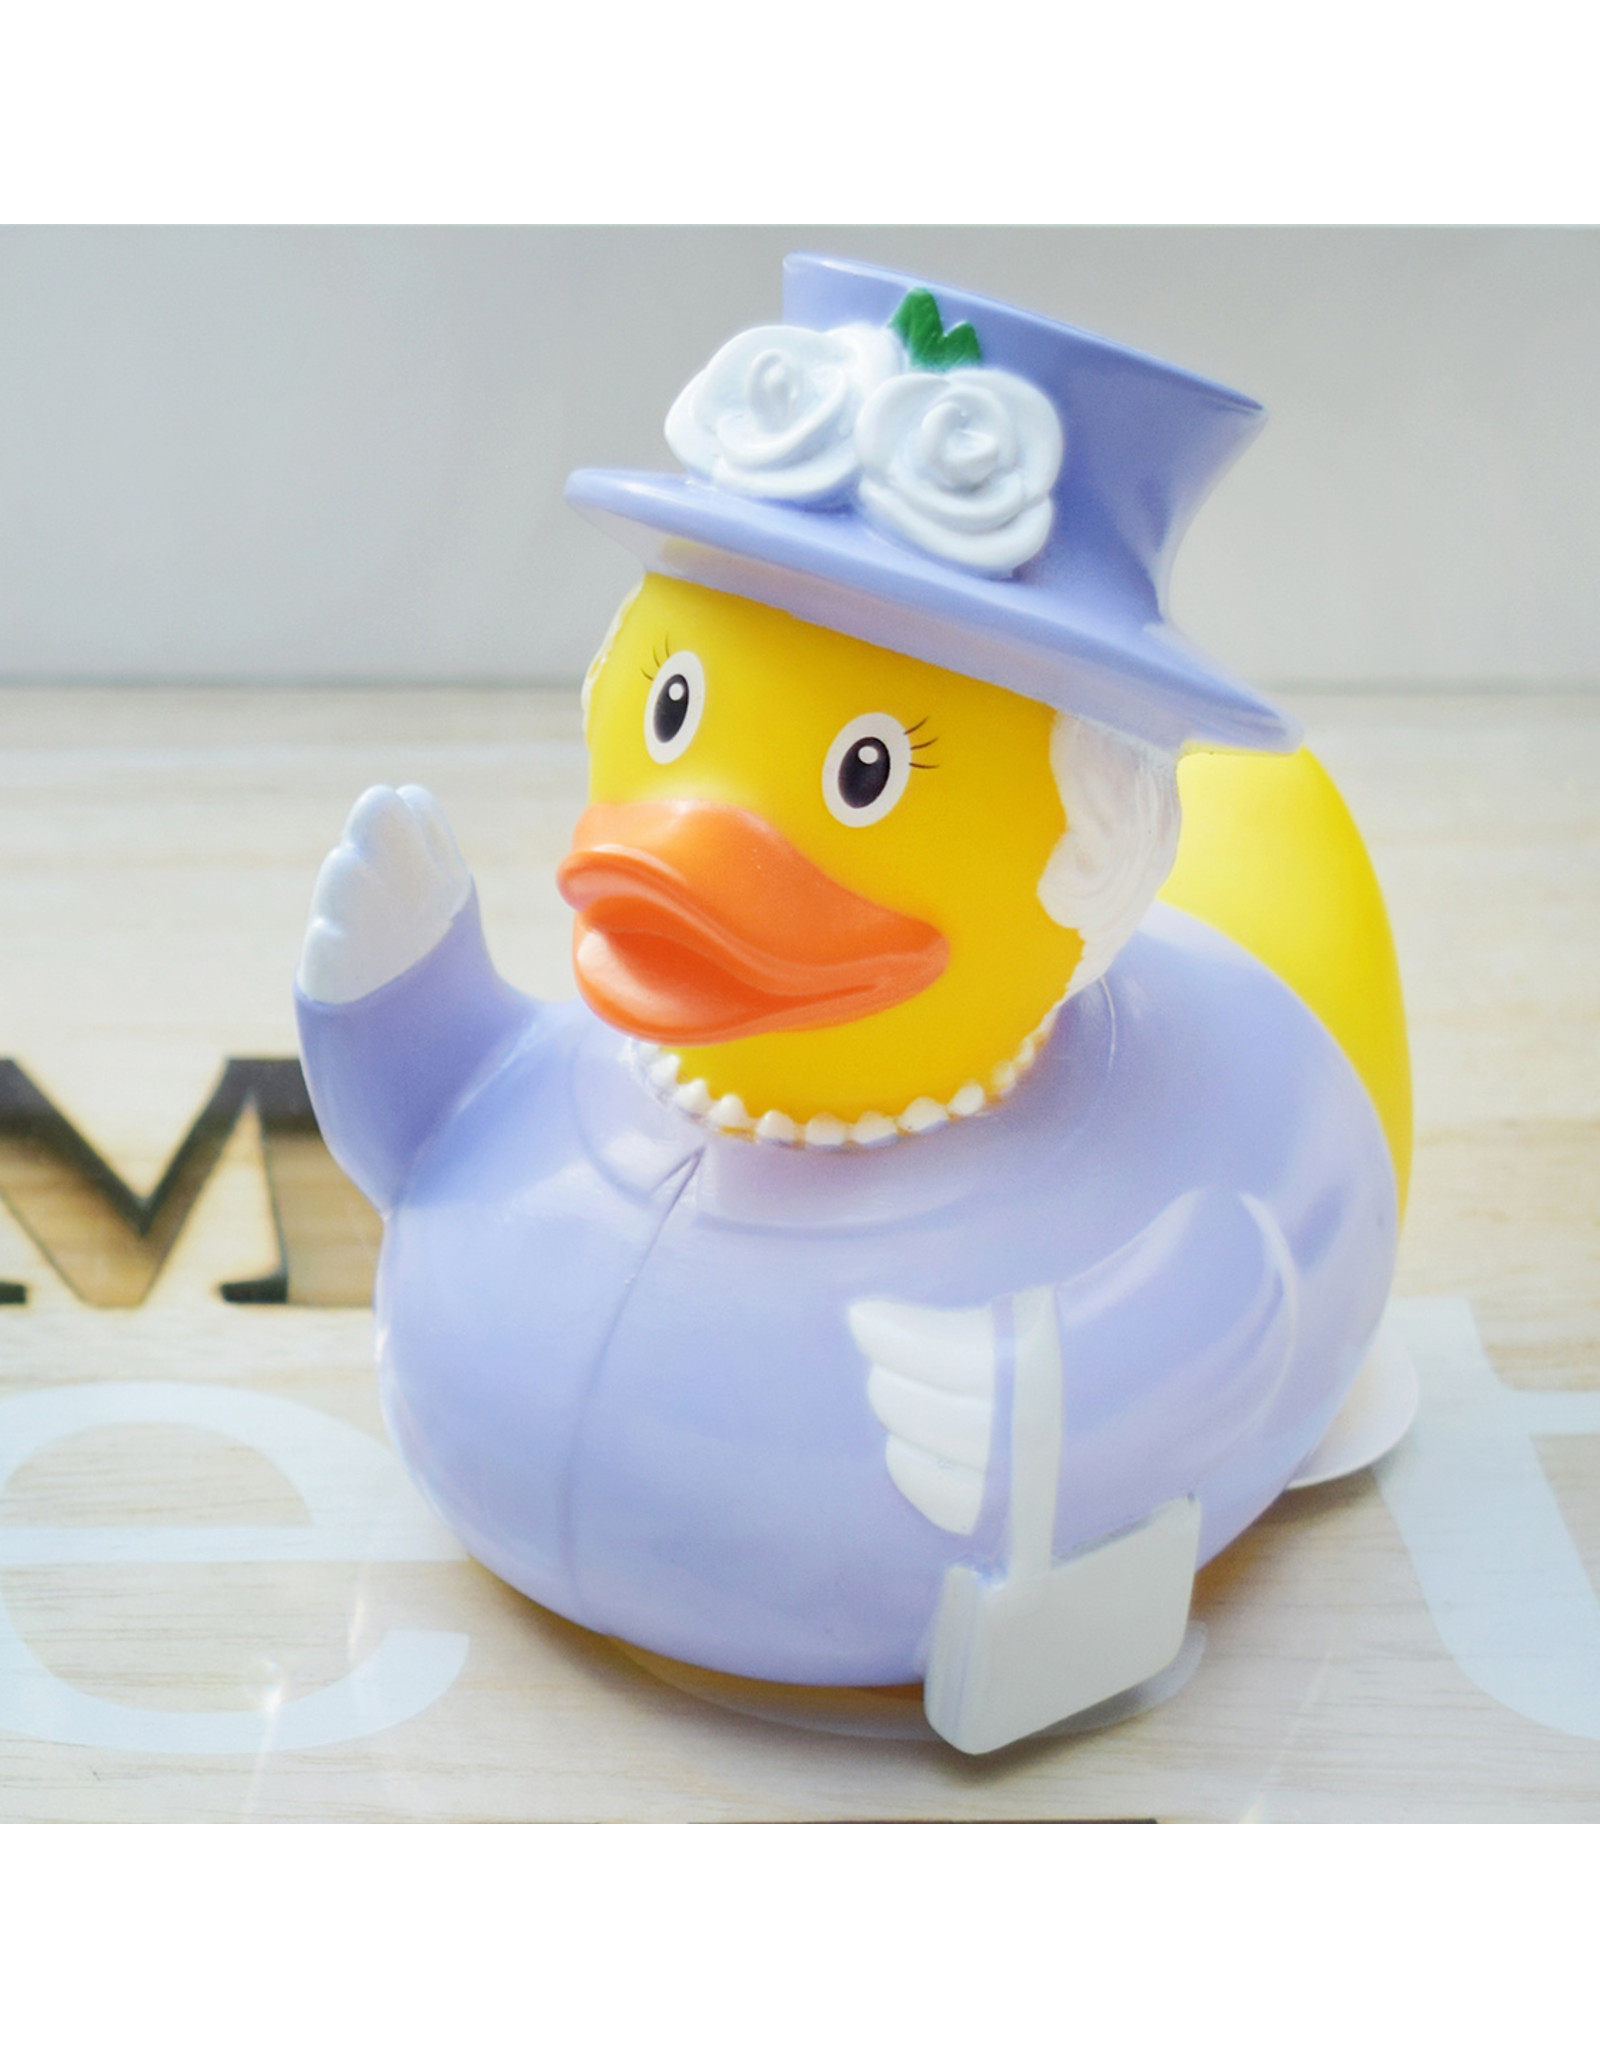 Lilalu "The Queen" Rubber Duck